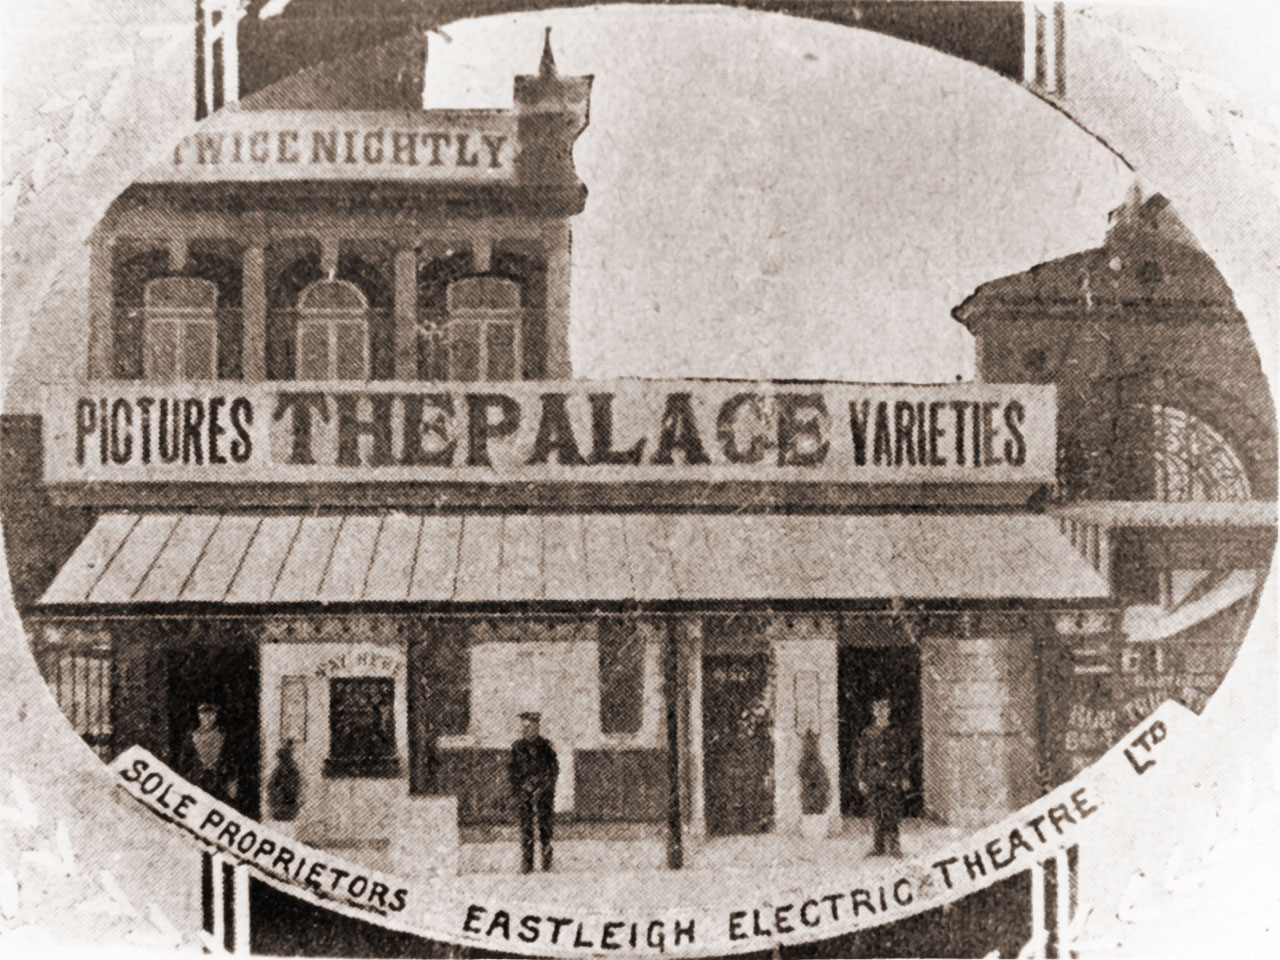 The Picture Palace